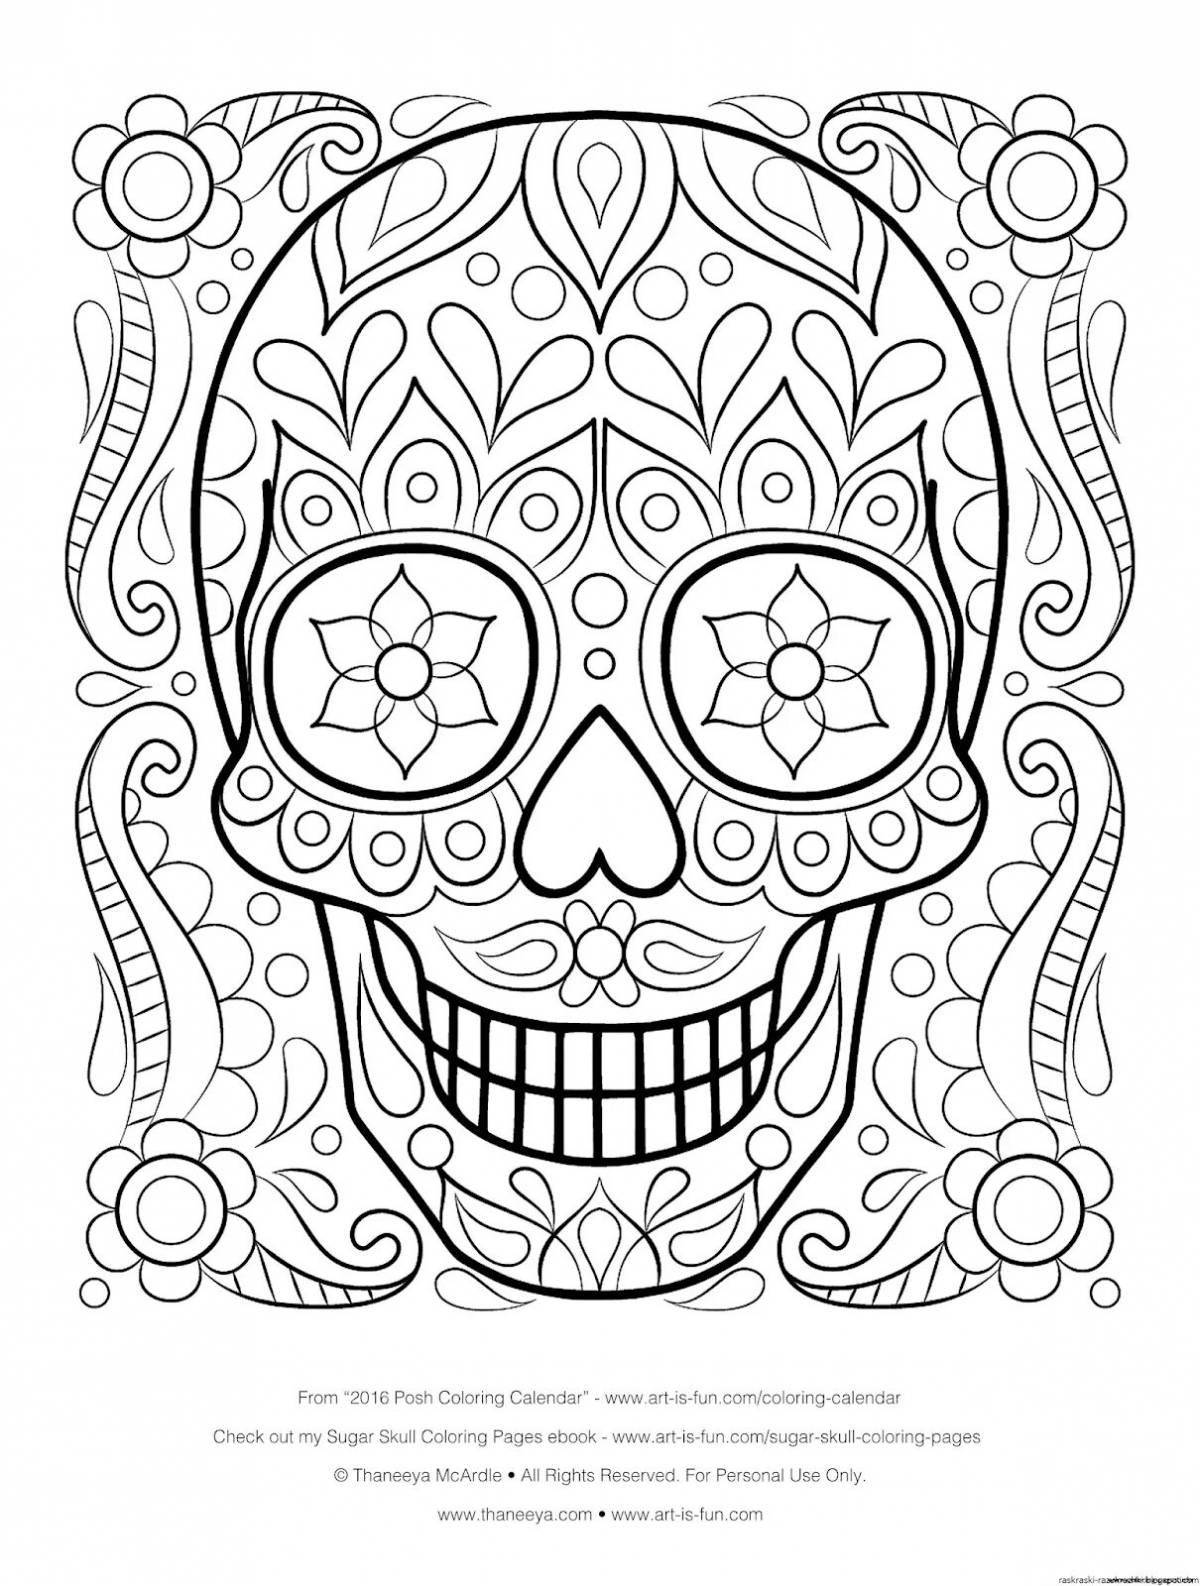 Soothing 15 year anti-stress coloring book